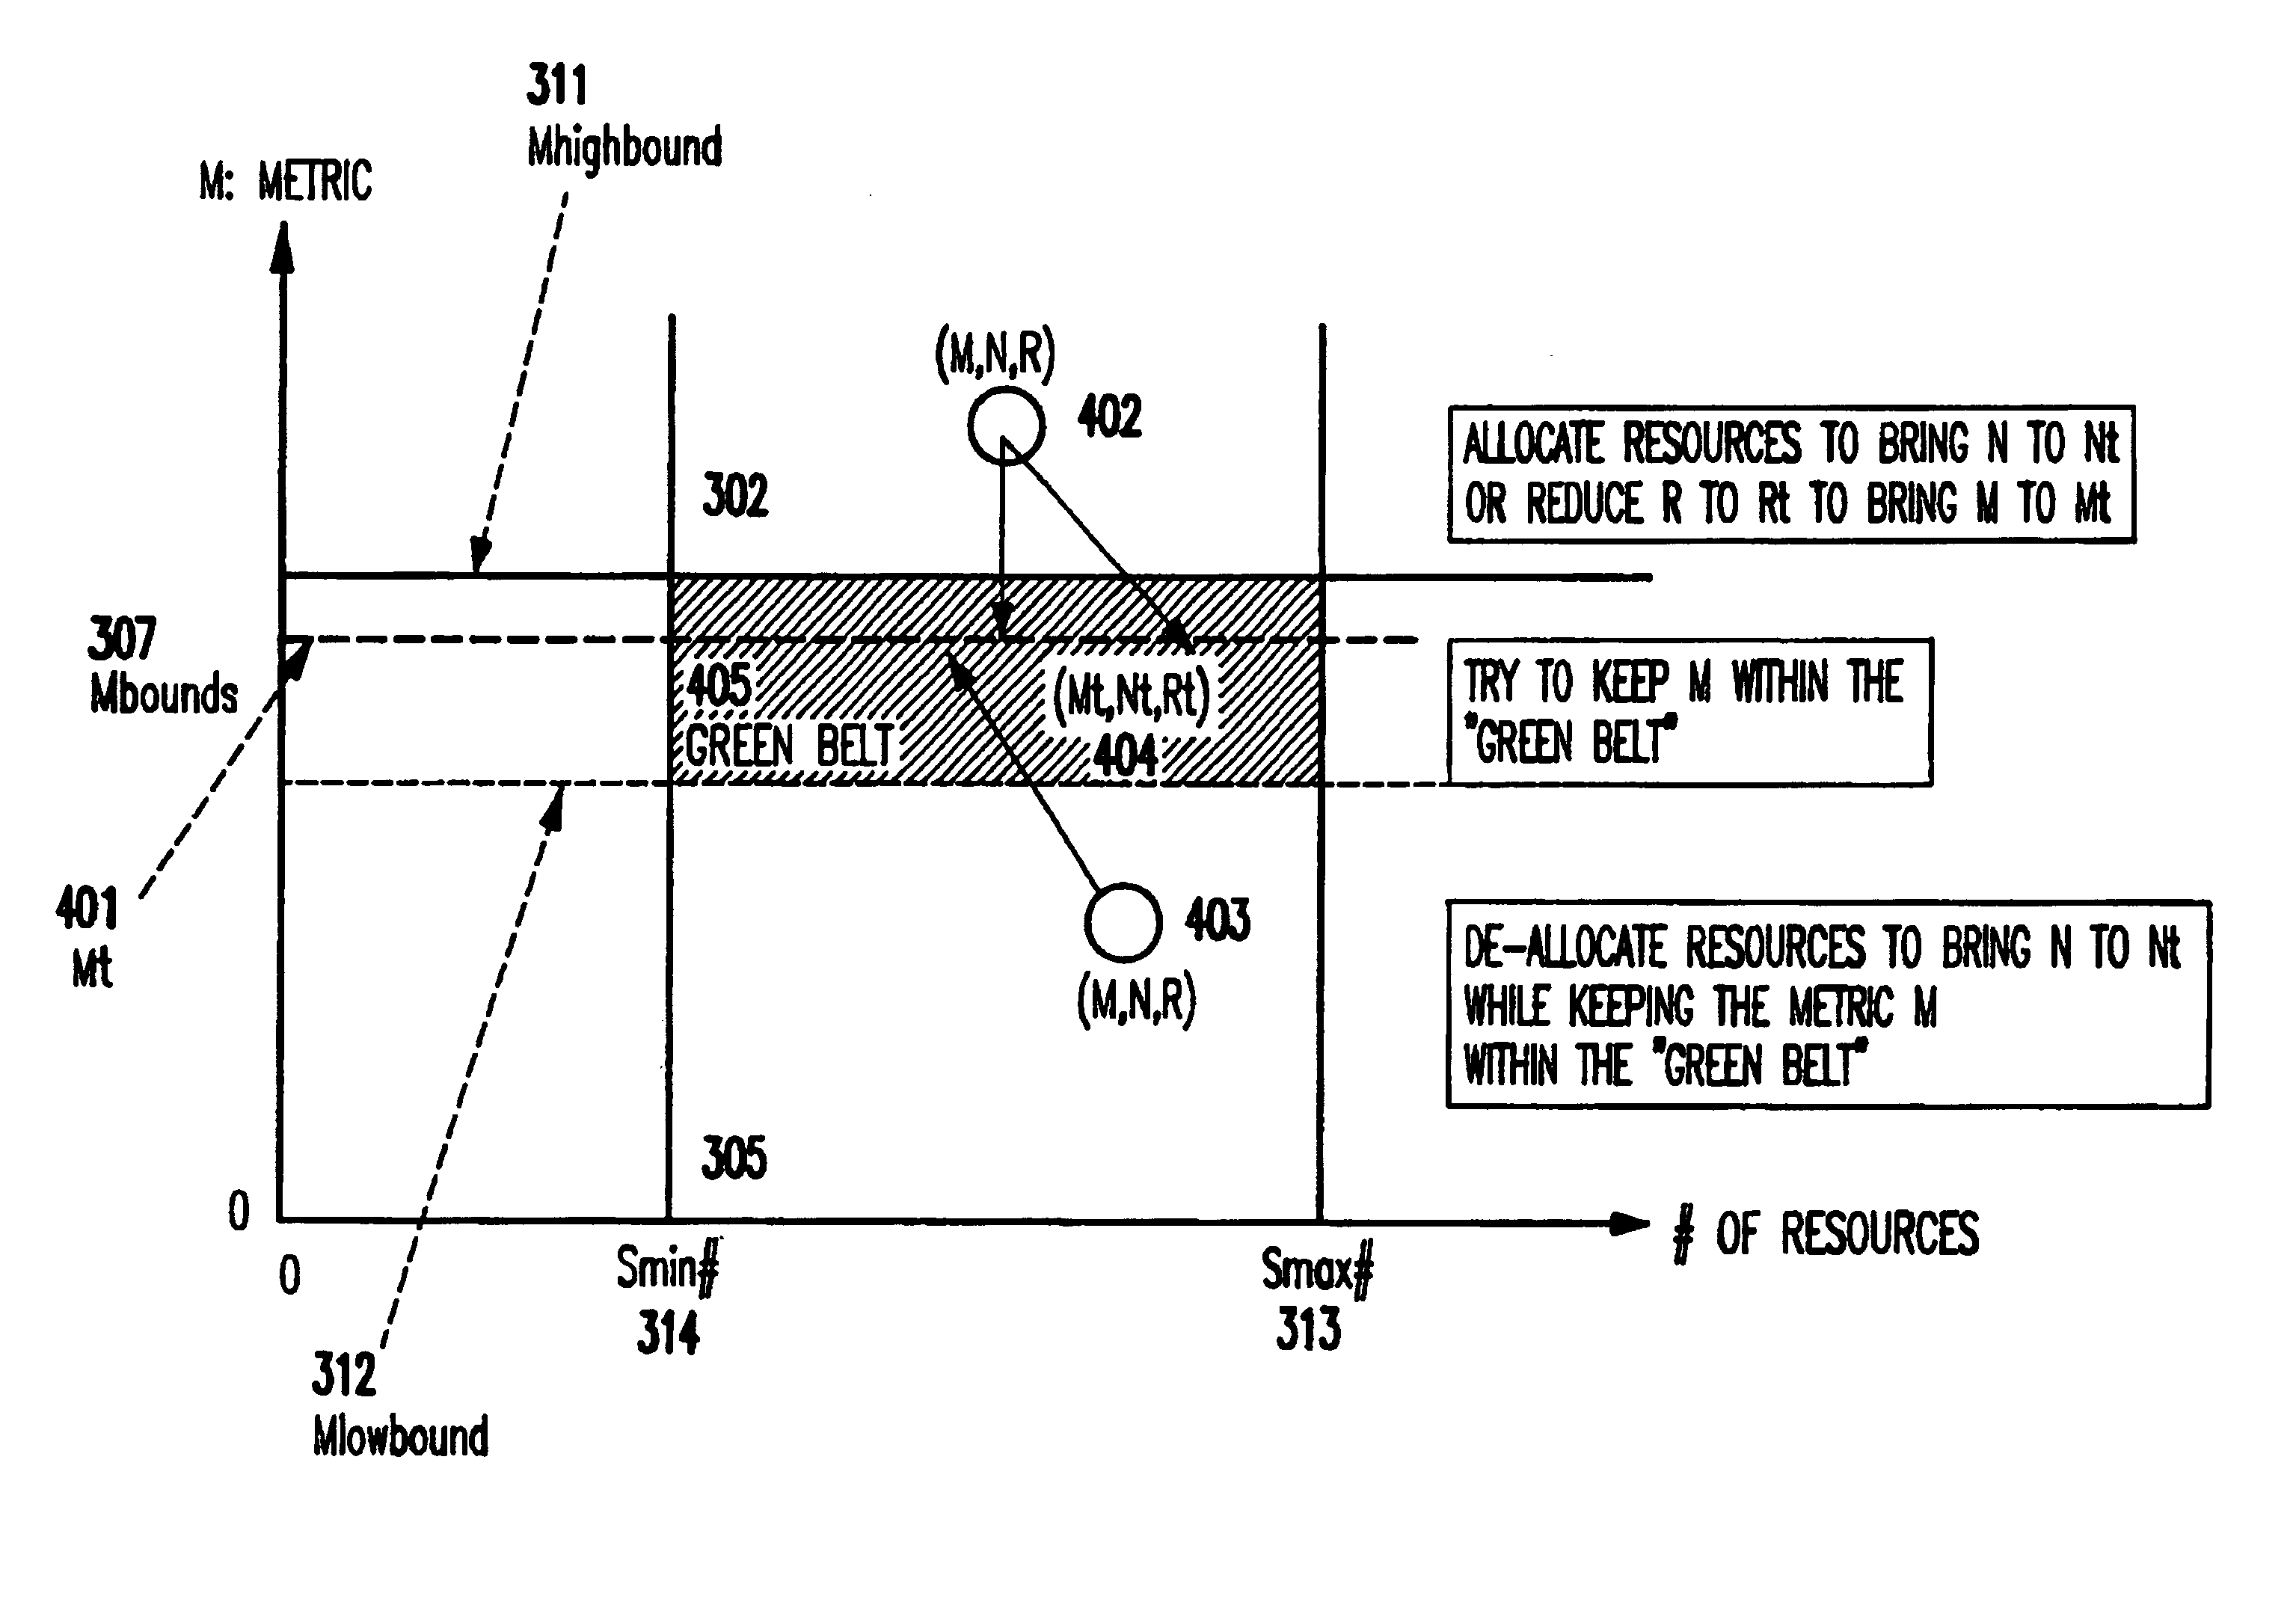 Method and apparatus for dynamically adjusting resources assigned to plurality of customers, for meeting service level agreements (SLAS) with minimal resources, and allowing common pools of resources to be used across plural customers on a demand basis